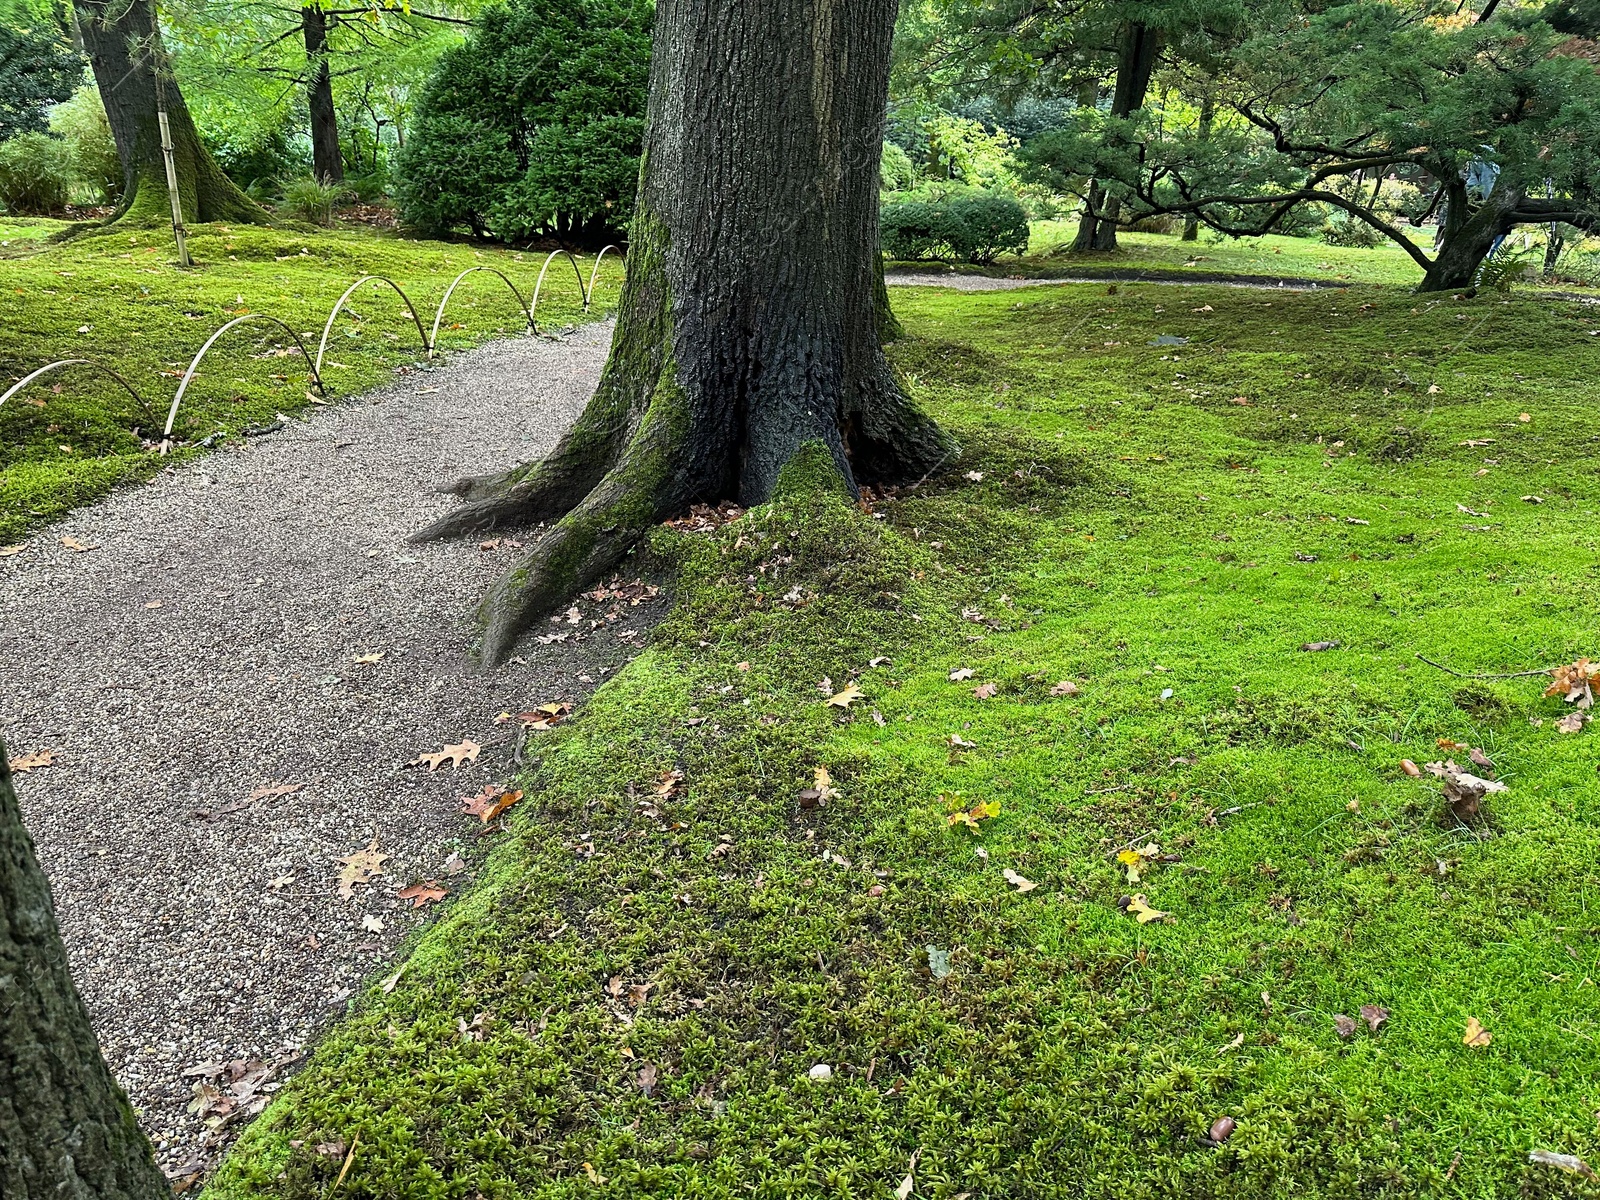 Photo of Bright moss on ground and tree trunk near pathway in park